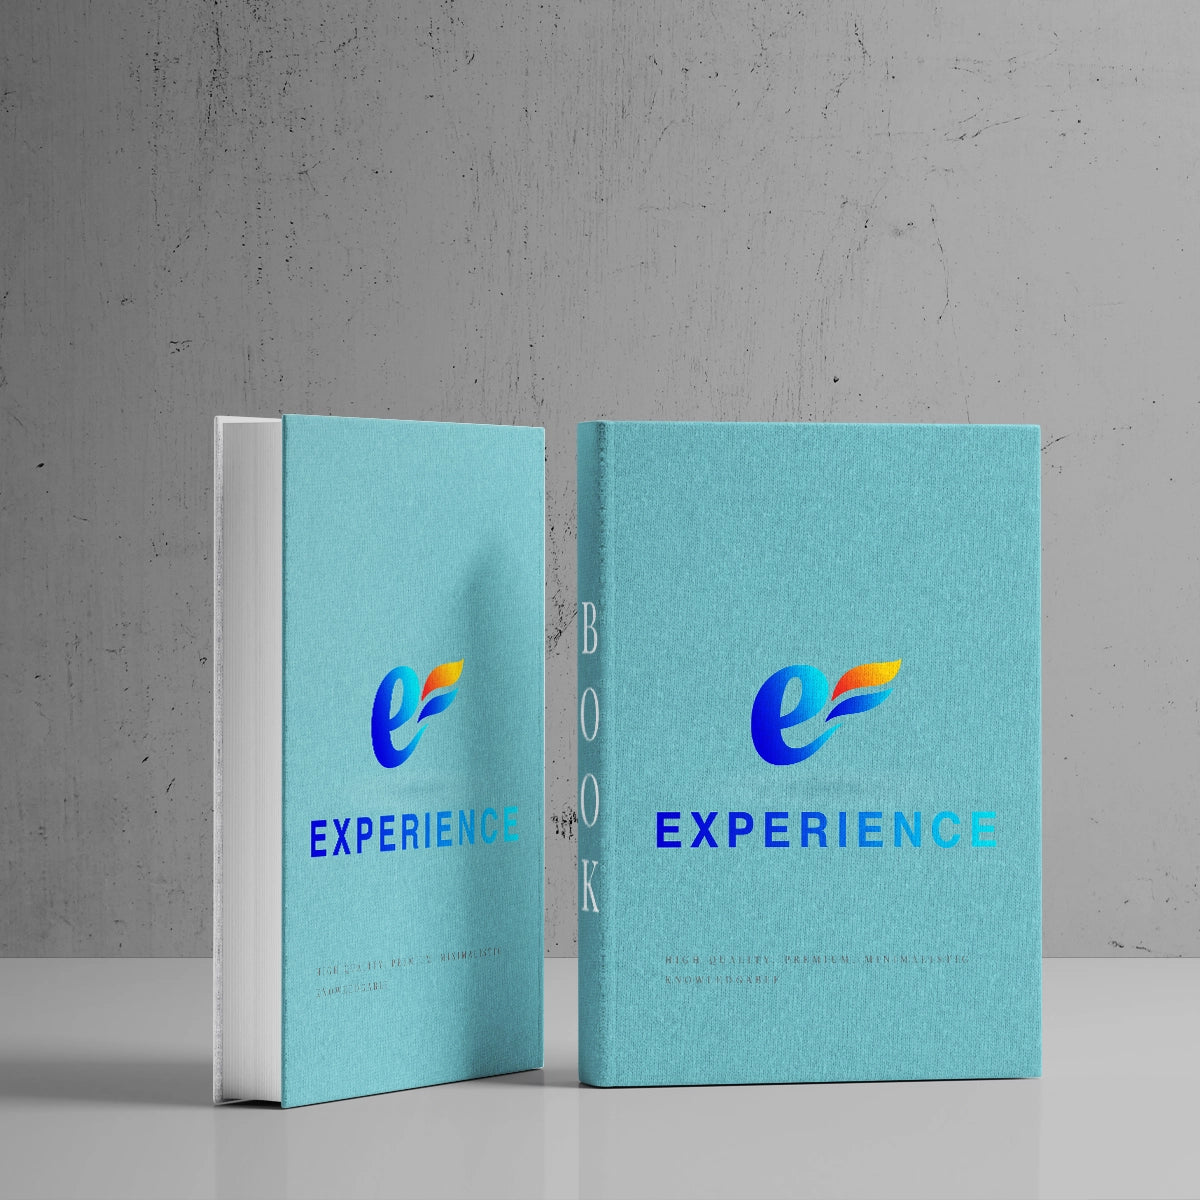 EXPERIENCE.WS